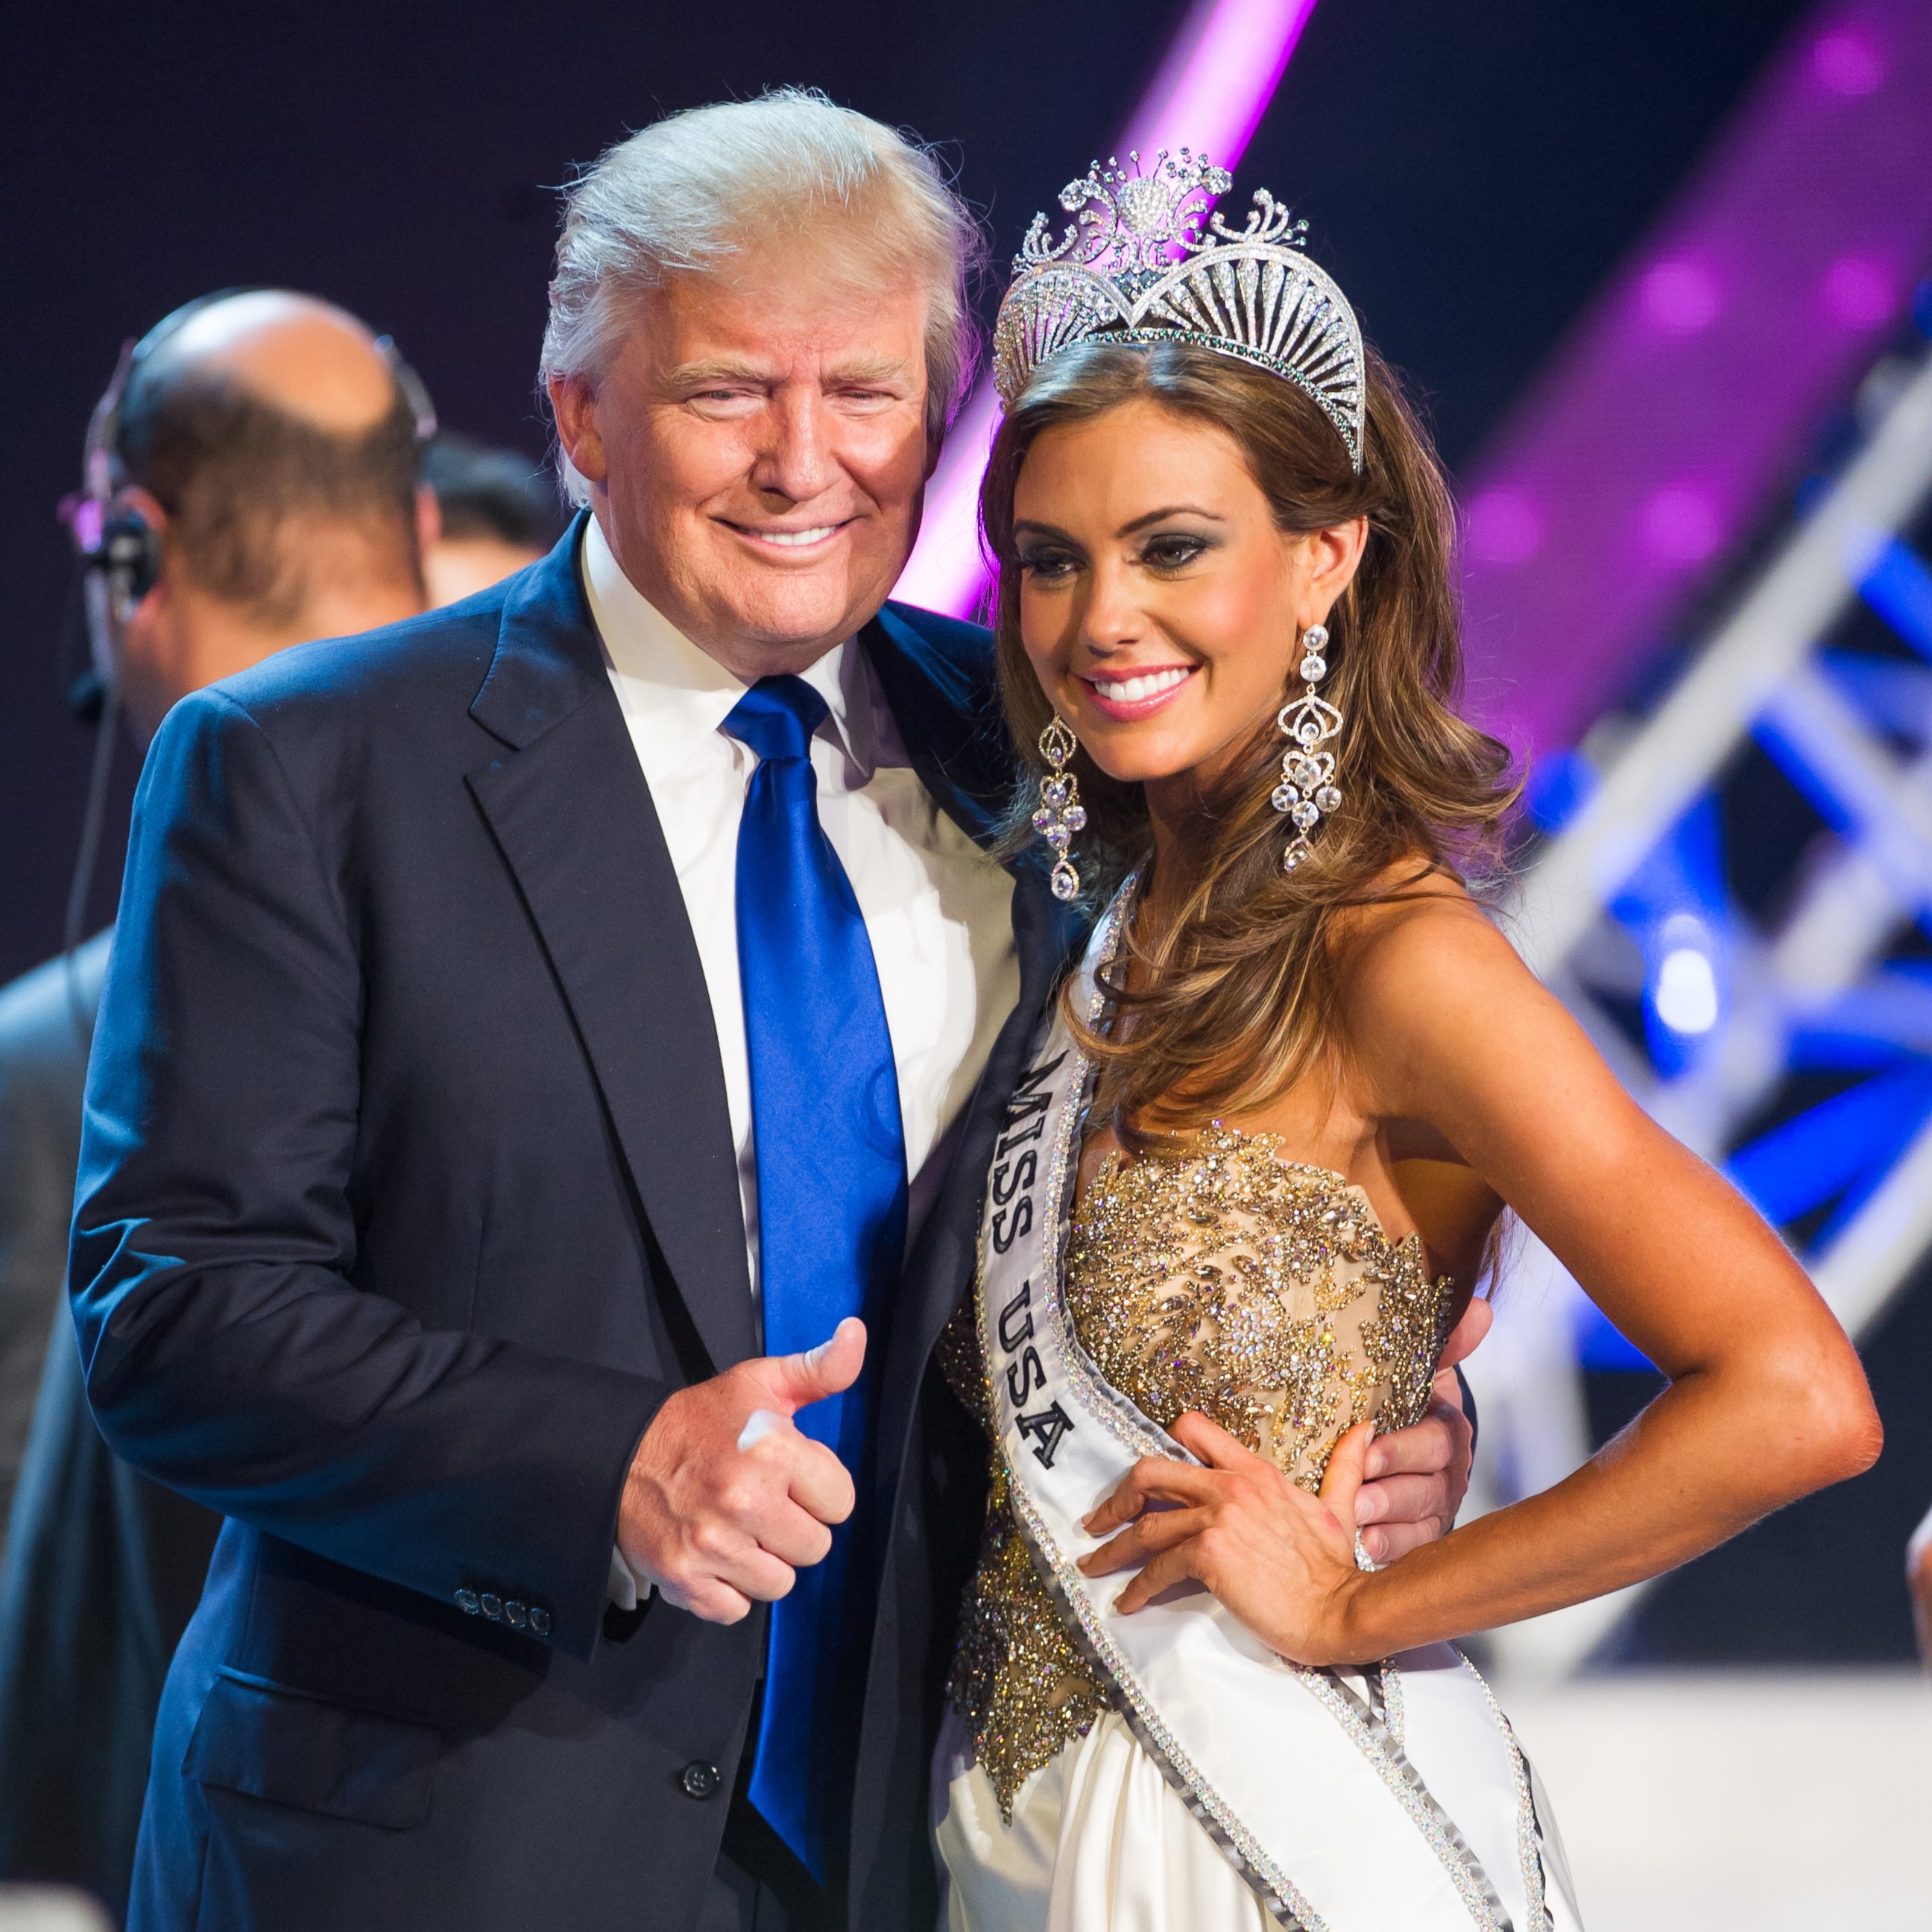 PHOTO:Donald Trump and Miss Connecticut USA Erin Brady poses onstage after winning the 2013 Miss USA pageant, June 16, 2013, in Las Vegas. 